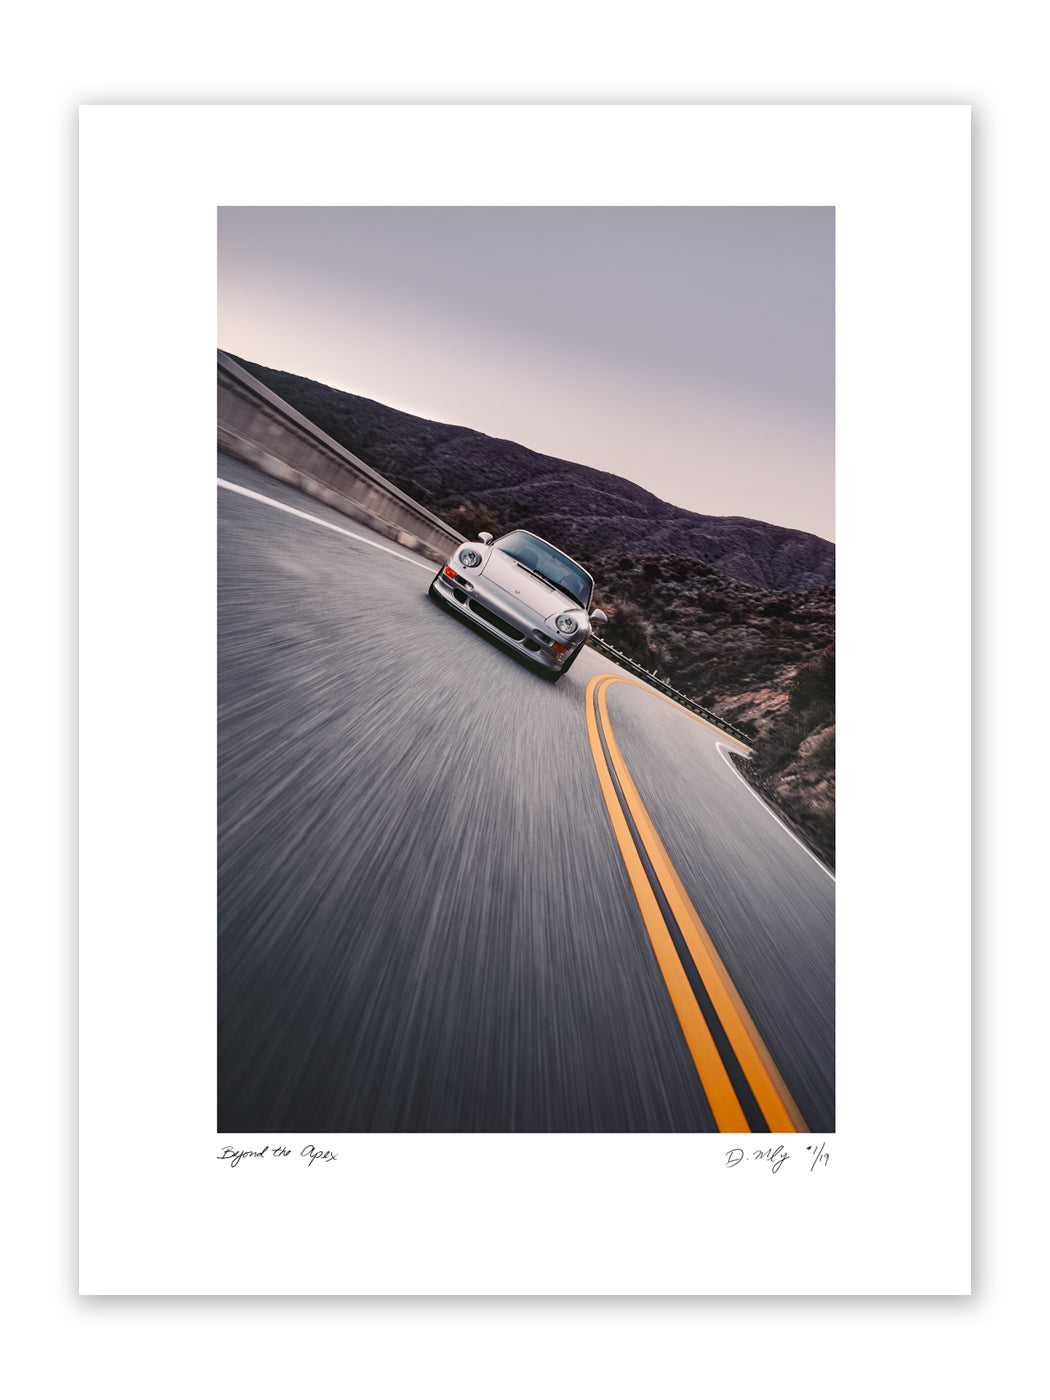 #002 Signature Series Limited Poster - "Beyond the Apex"